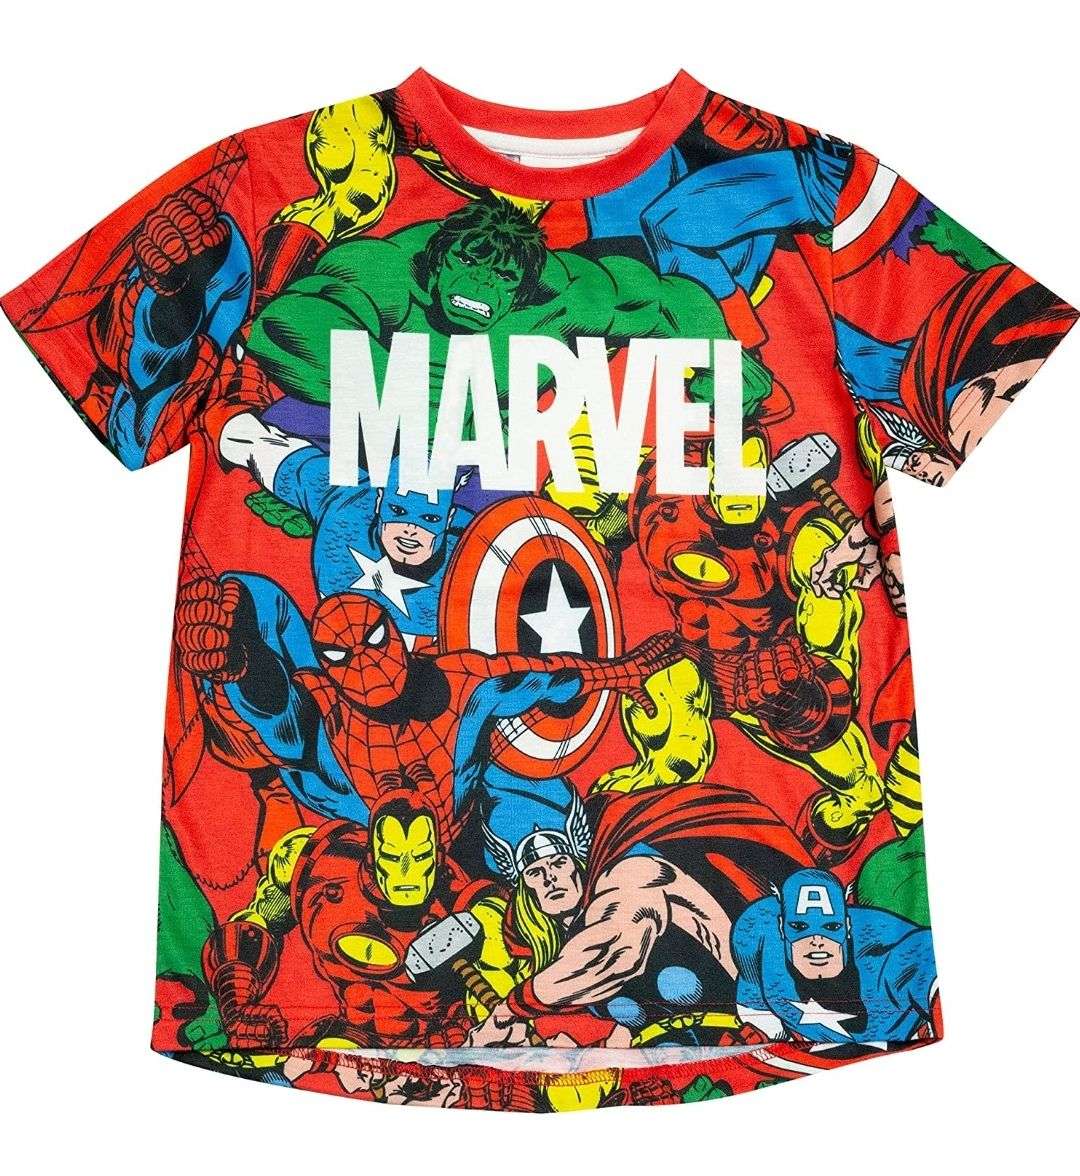 Officially Licensed Marvel Comics Heroes Unisex Kids T-Shirt Ages 3-12 Years 